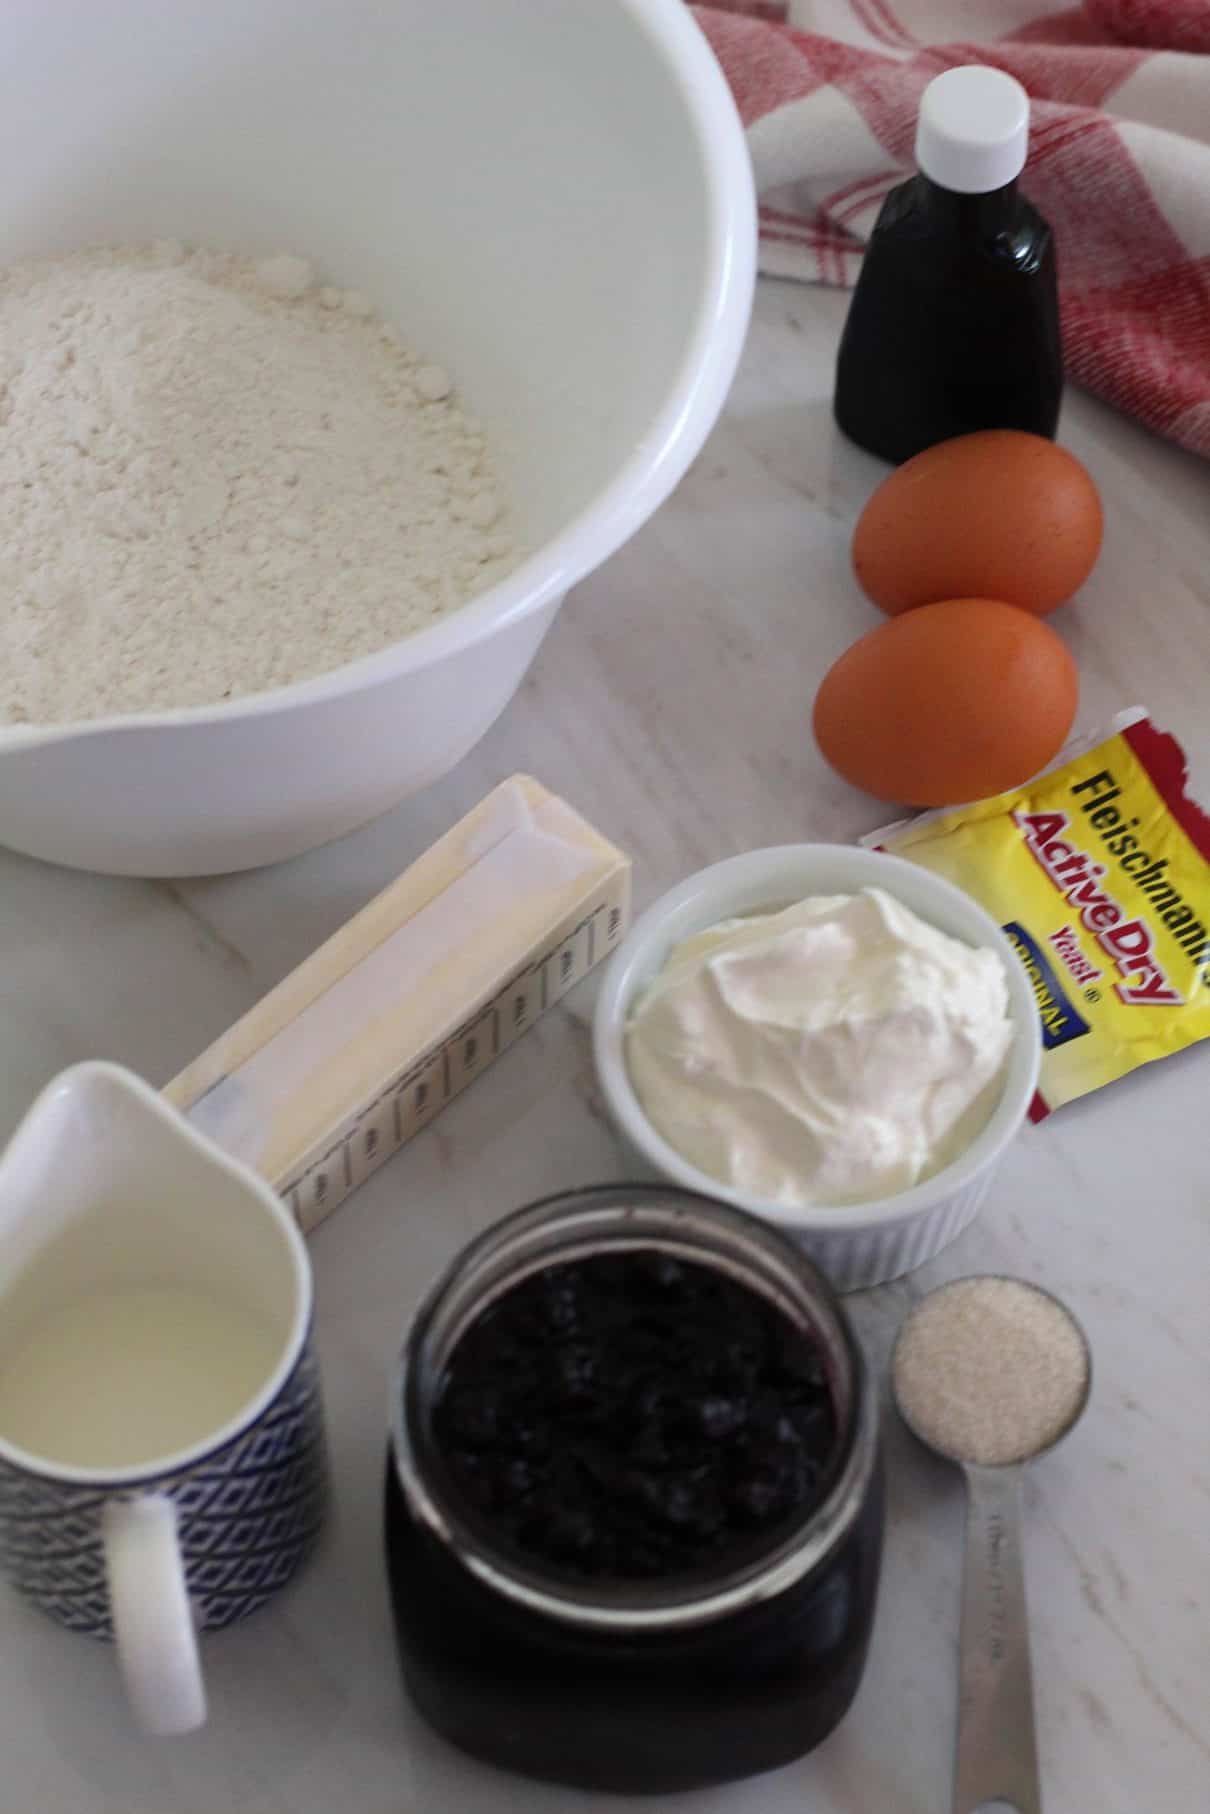 Several ingredients laid out for making the sour cream cookies. Flour, vanilla, eggs, yeast, sour cream, milk, sugar, butter and jam.